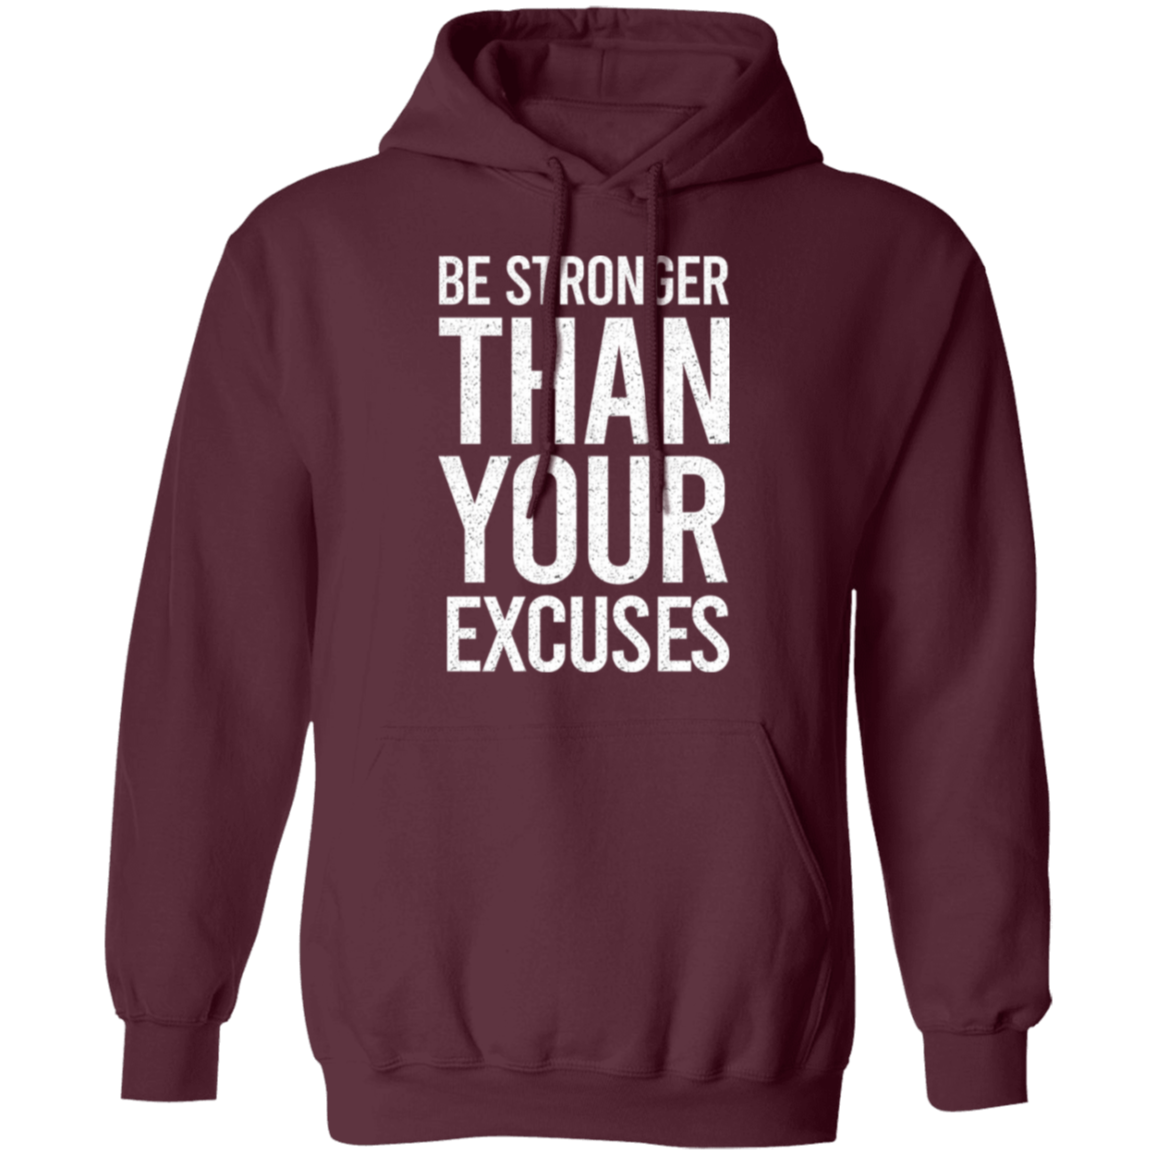 Be Stronger than your Excuses Premium Unisex Hoodies